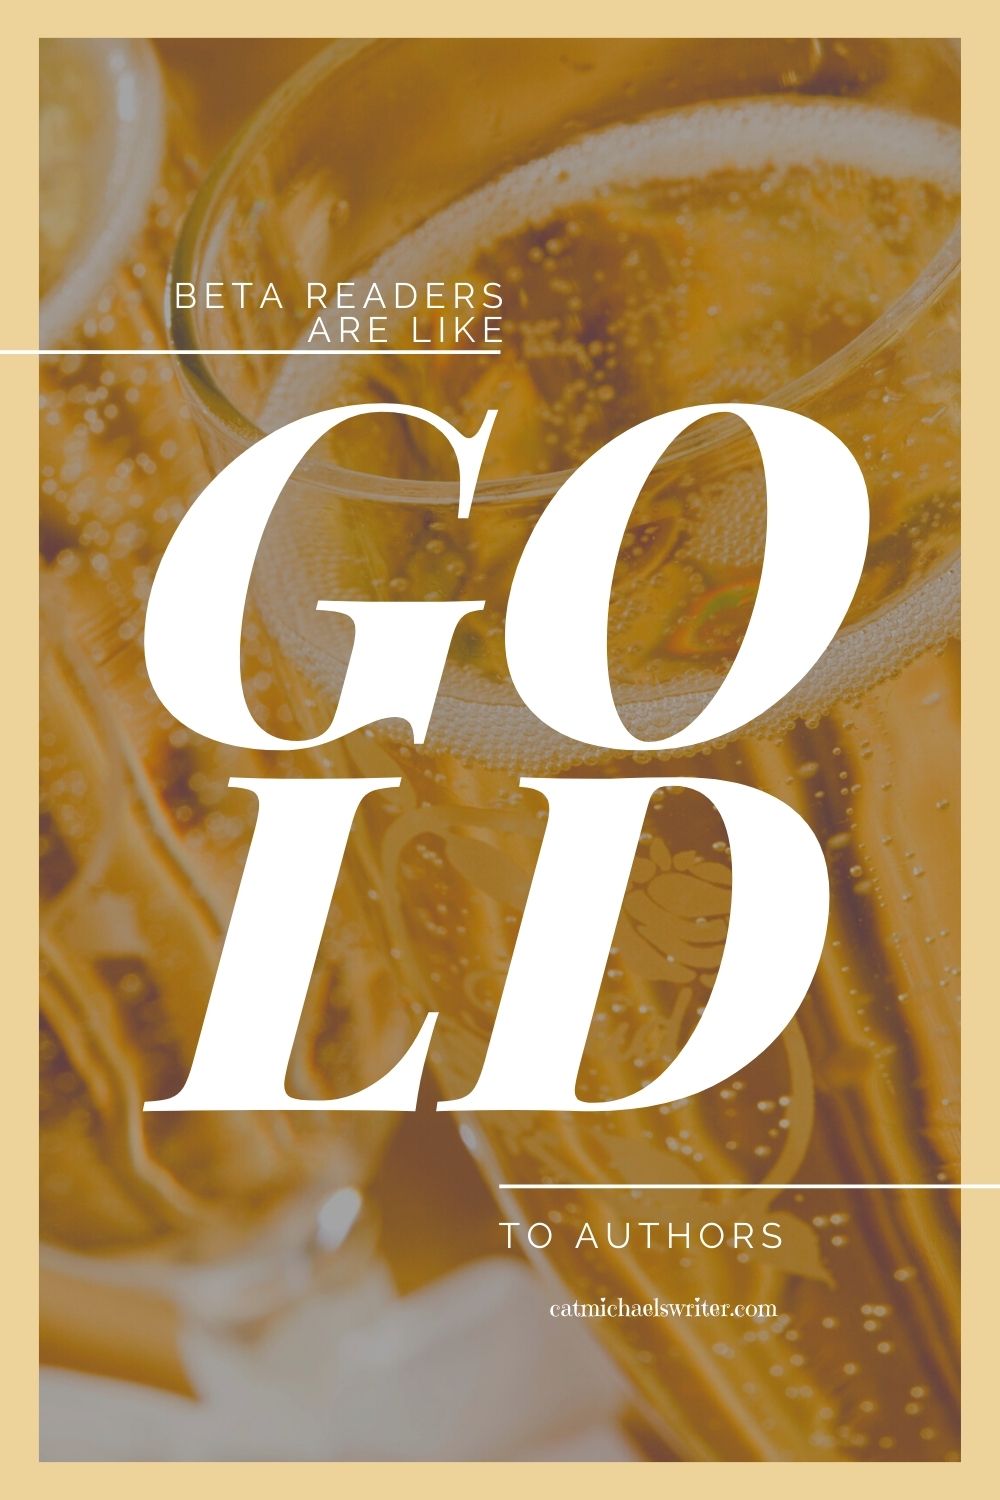 So an author asks you to be a beta reader - now what? catmichaelswriter.com